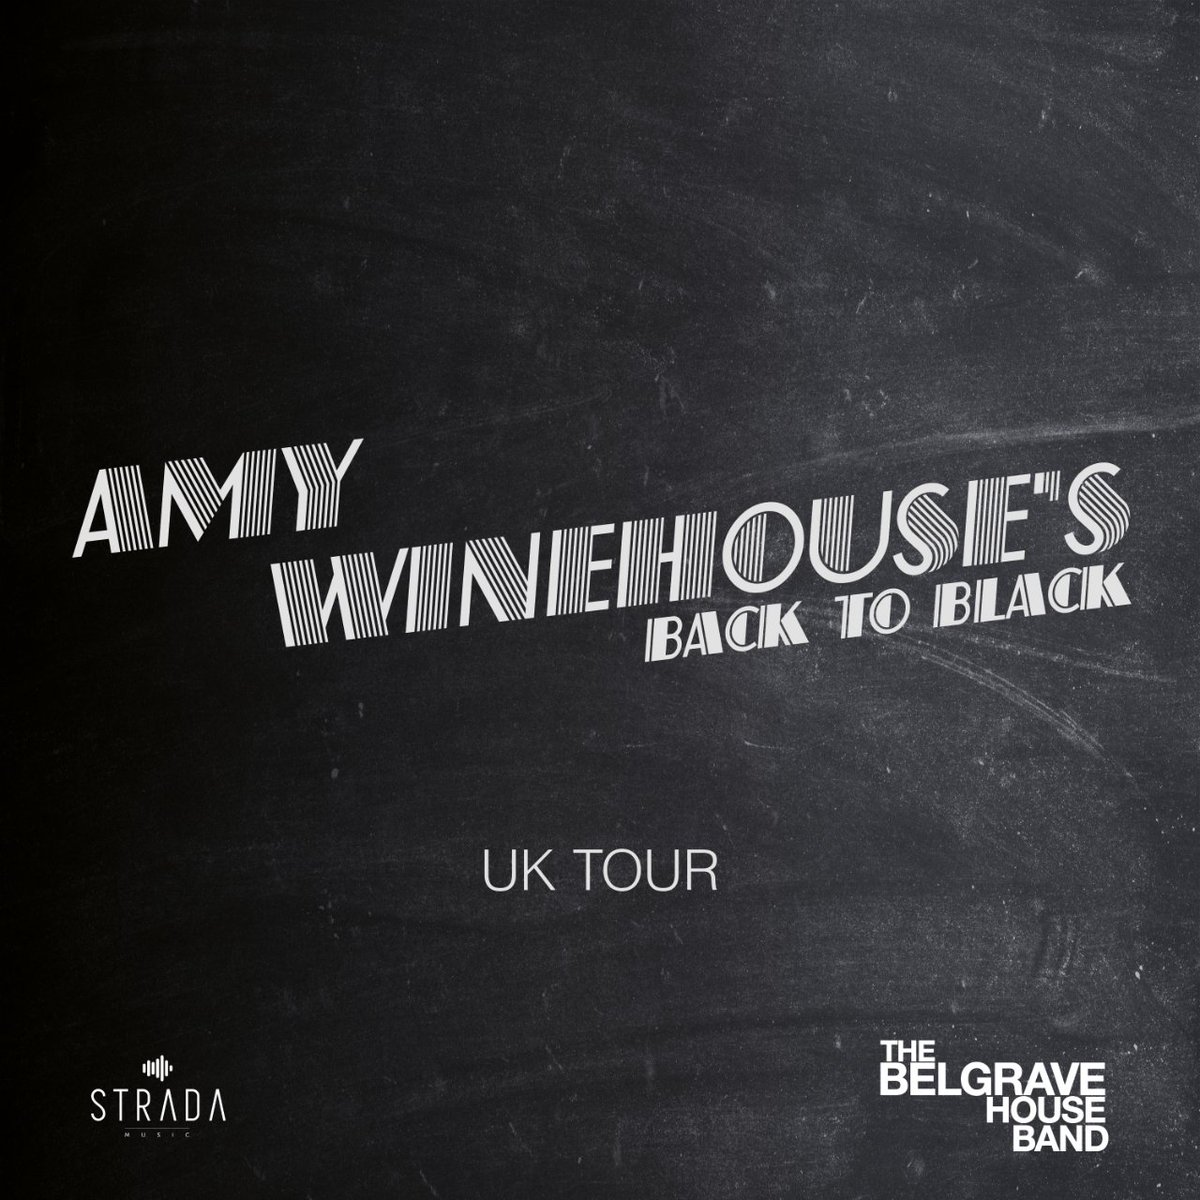 Amy Winehouse's Back To Black - The Belgrave House Band 🎼 Thurs 16 May 7.30pm 🎟 trinitytheatre.net/events/amy-win… The Belgrave House Band are back once again for edition No.9 to take on Amy Winehouse’s second and most well-known album 'Back to Black'. 🎶 @BerryLamberts 😍